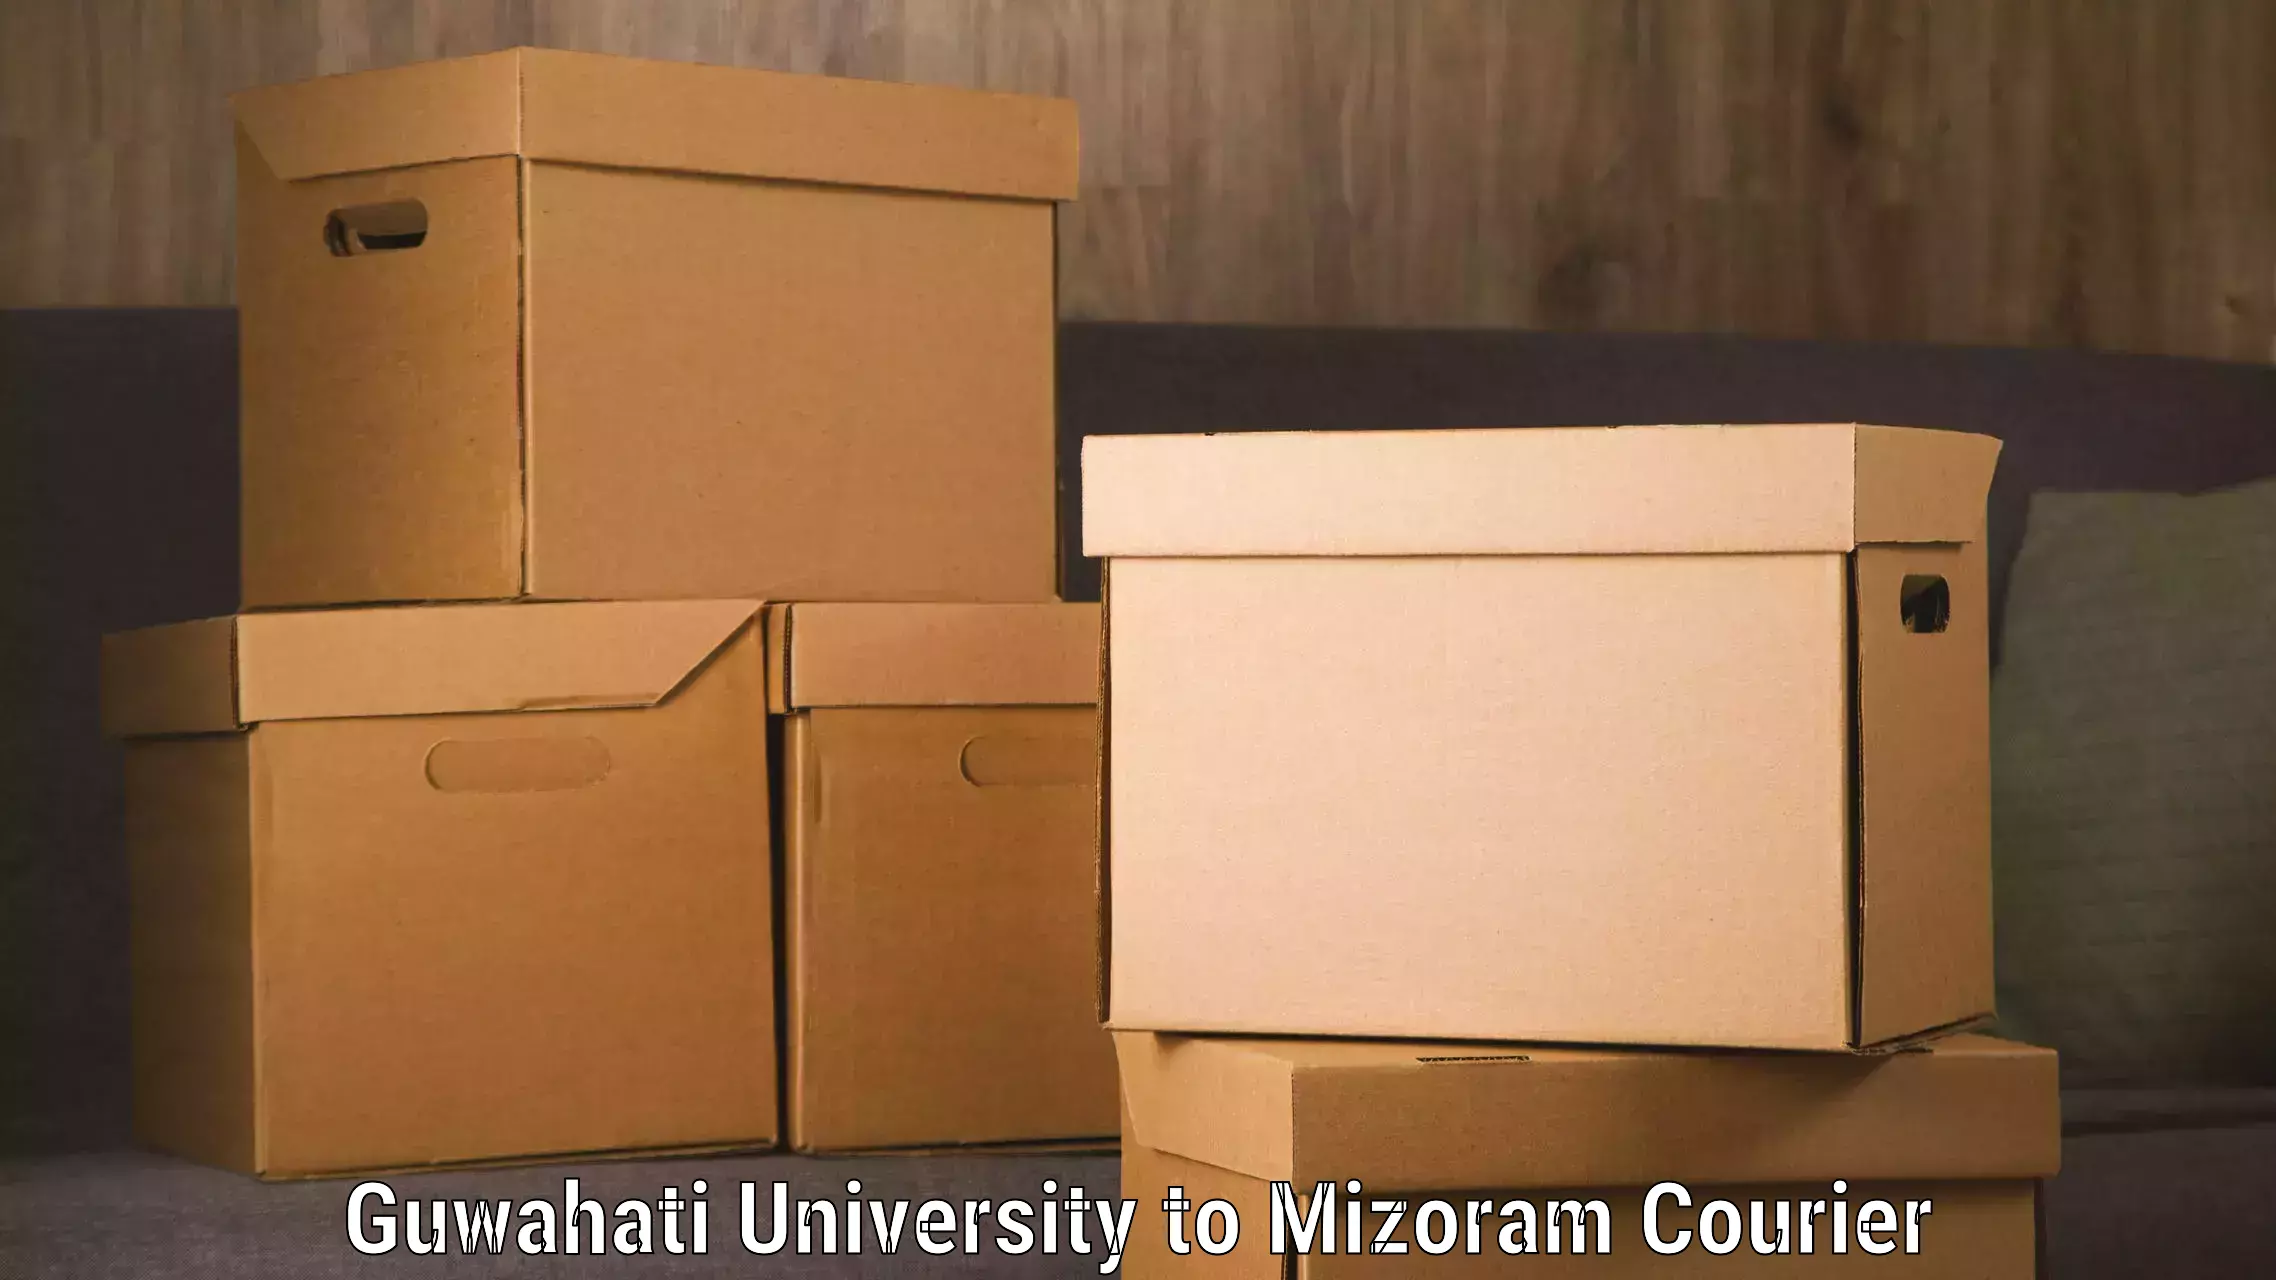 Reliable baggage delivery in Guwahati University to Mizoram